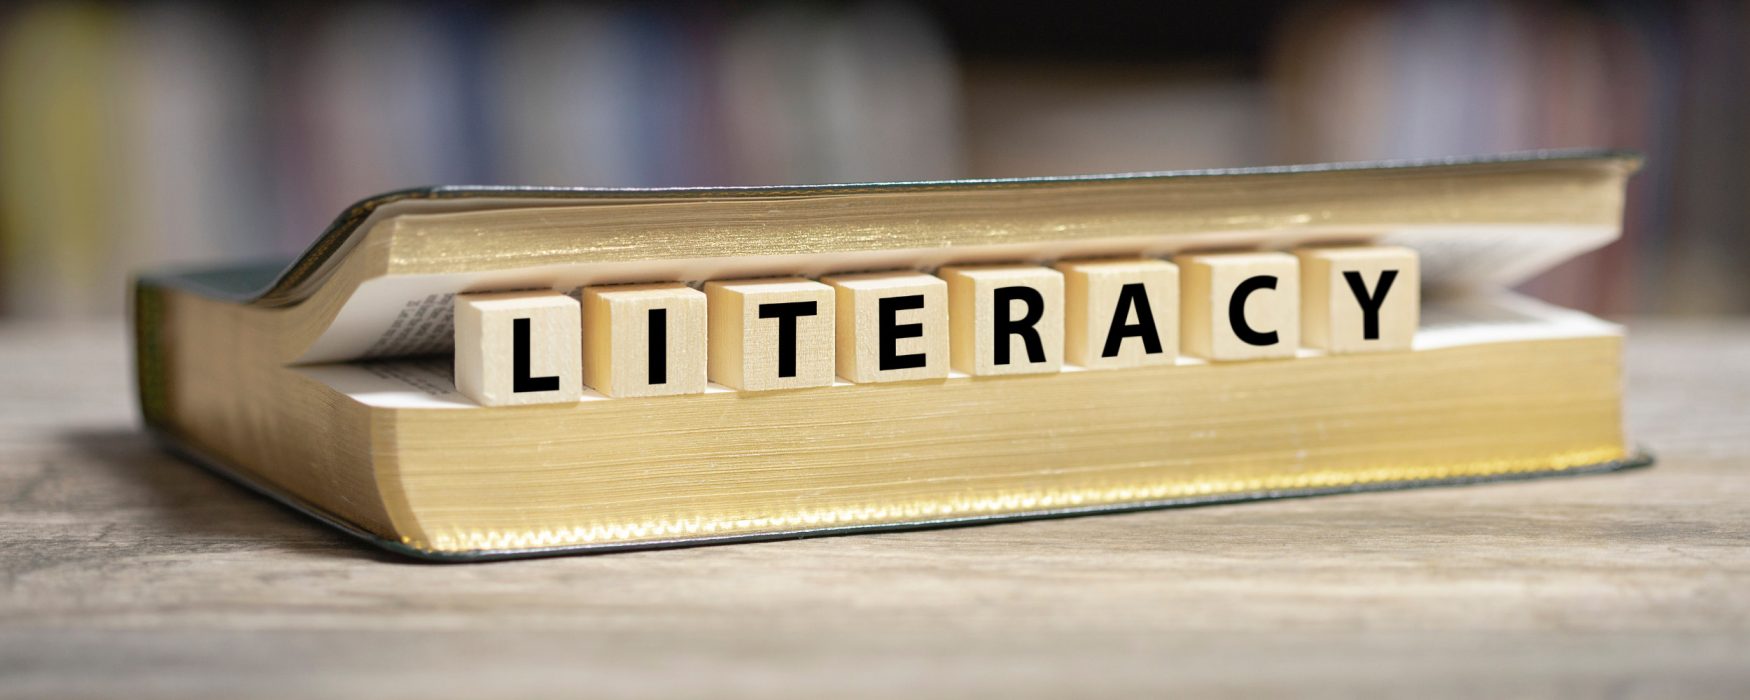 Image of a book and wooden blocks spelling the word "literacy"